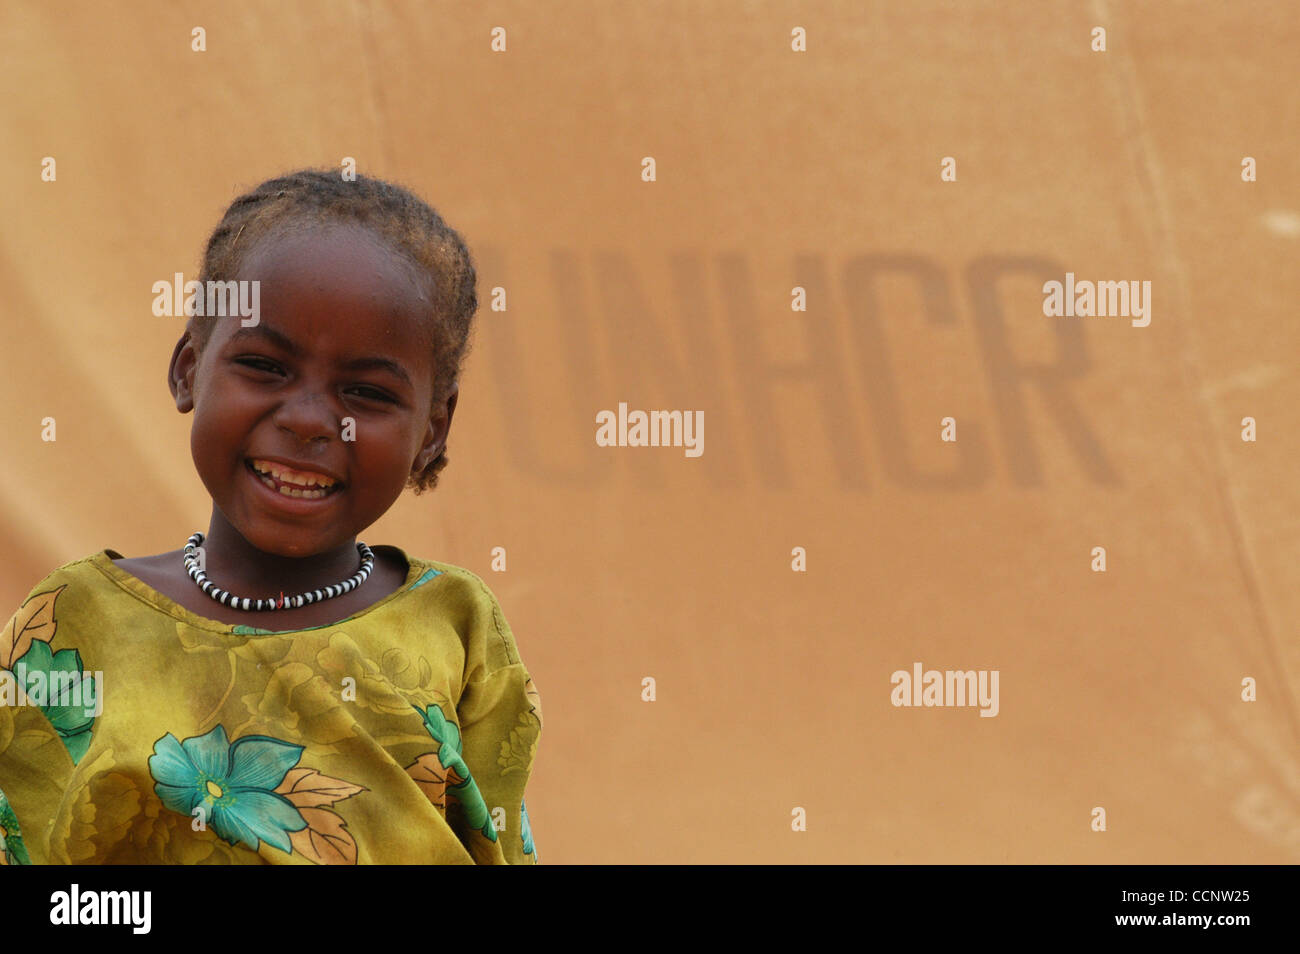 July 17, 2004, Abeche, Chad - A young girl, a refugee from Darfur, stands outside of her family tent provided by the United Nations High Commisioner for Refugees at a camp in Eastern Chad. (Credit: David Snyder/ZUMA Press) Stock Photo